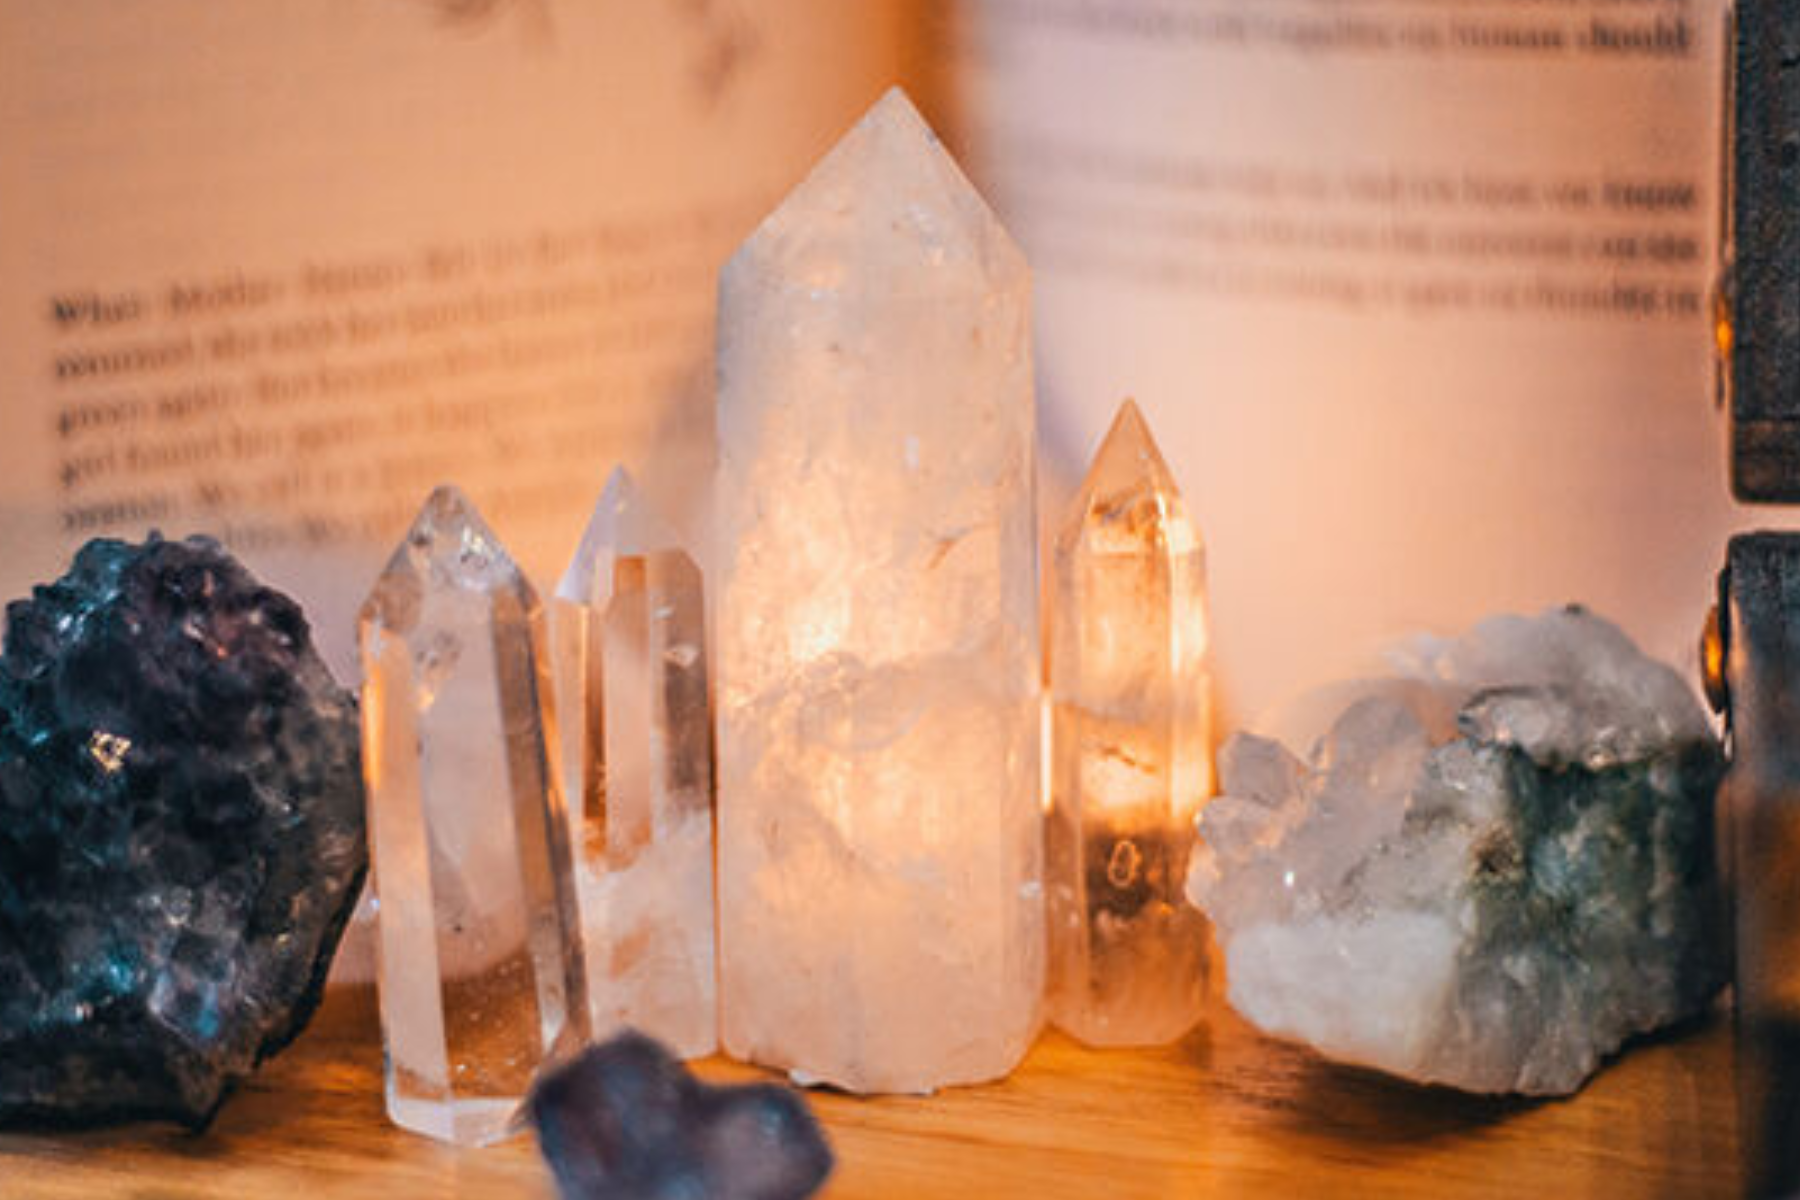 A collection of crystals on a table in front of a ritual book